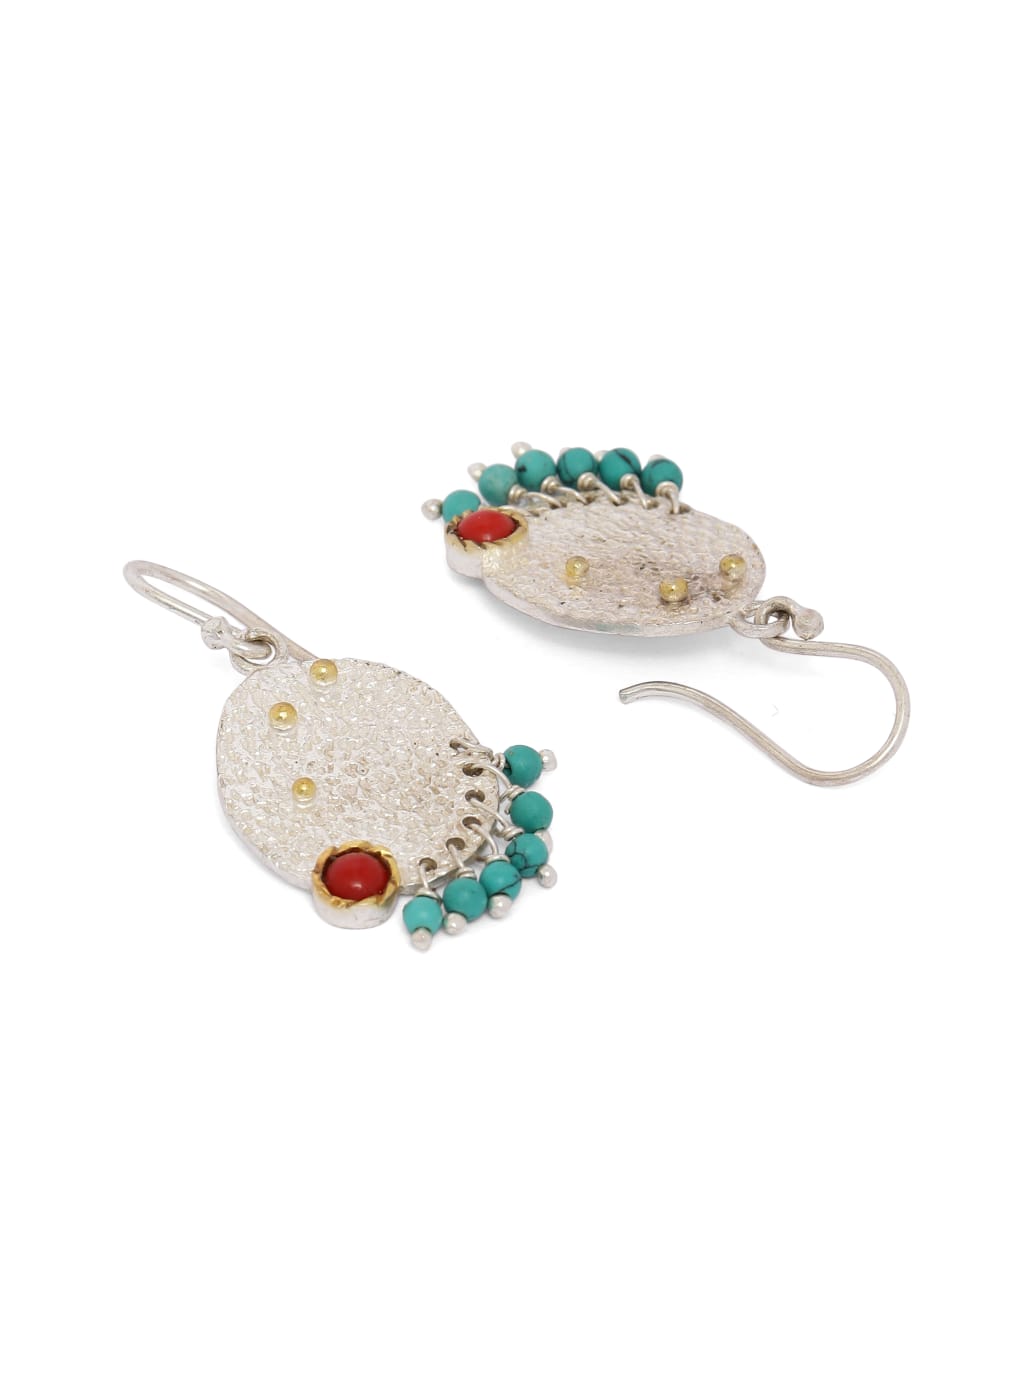 92.5 sterling Silver two tone with Turquoise beads hook earrings.